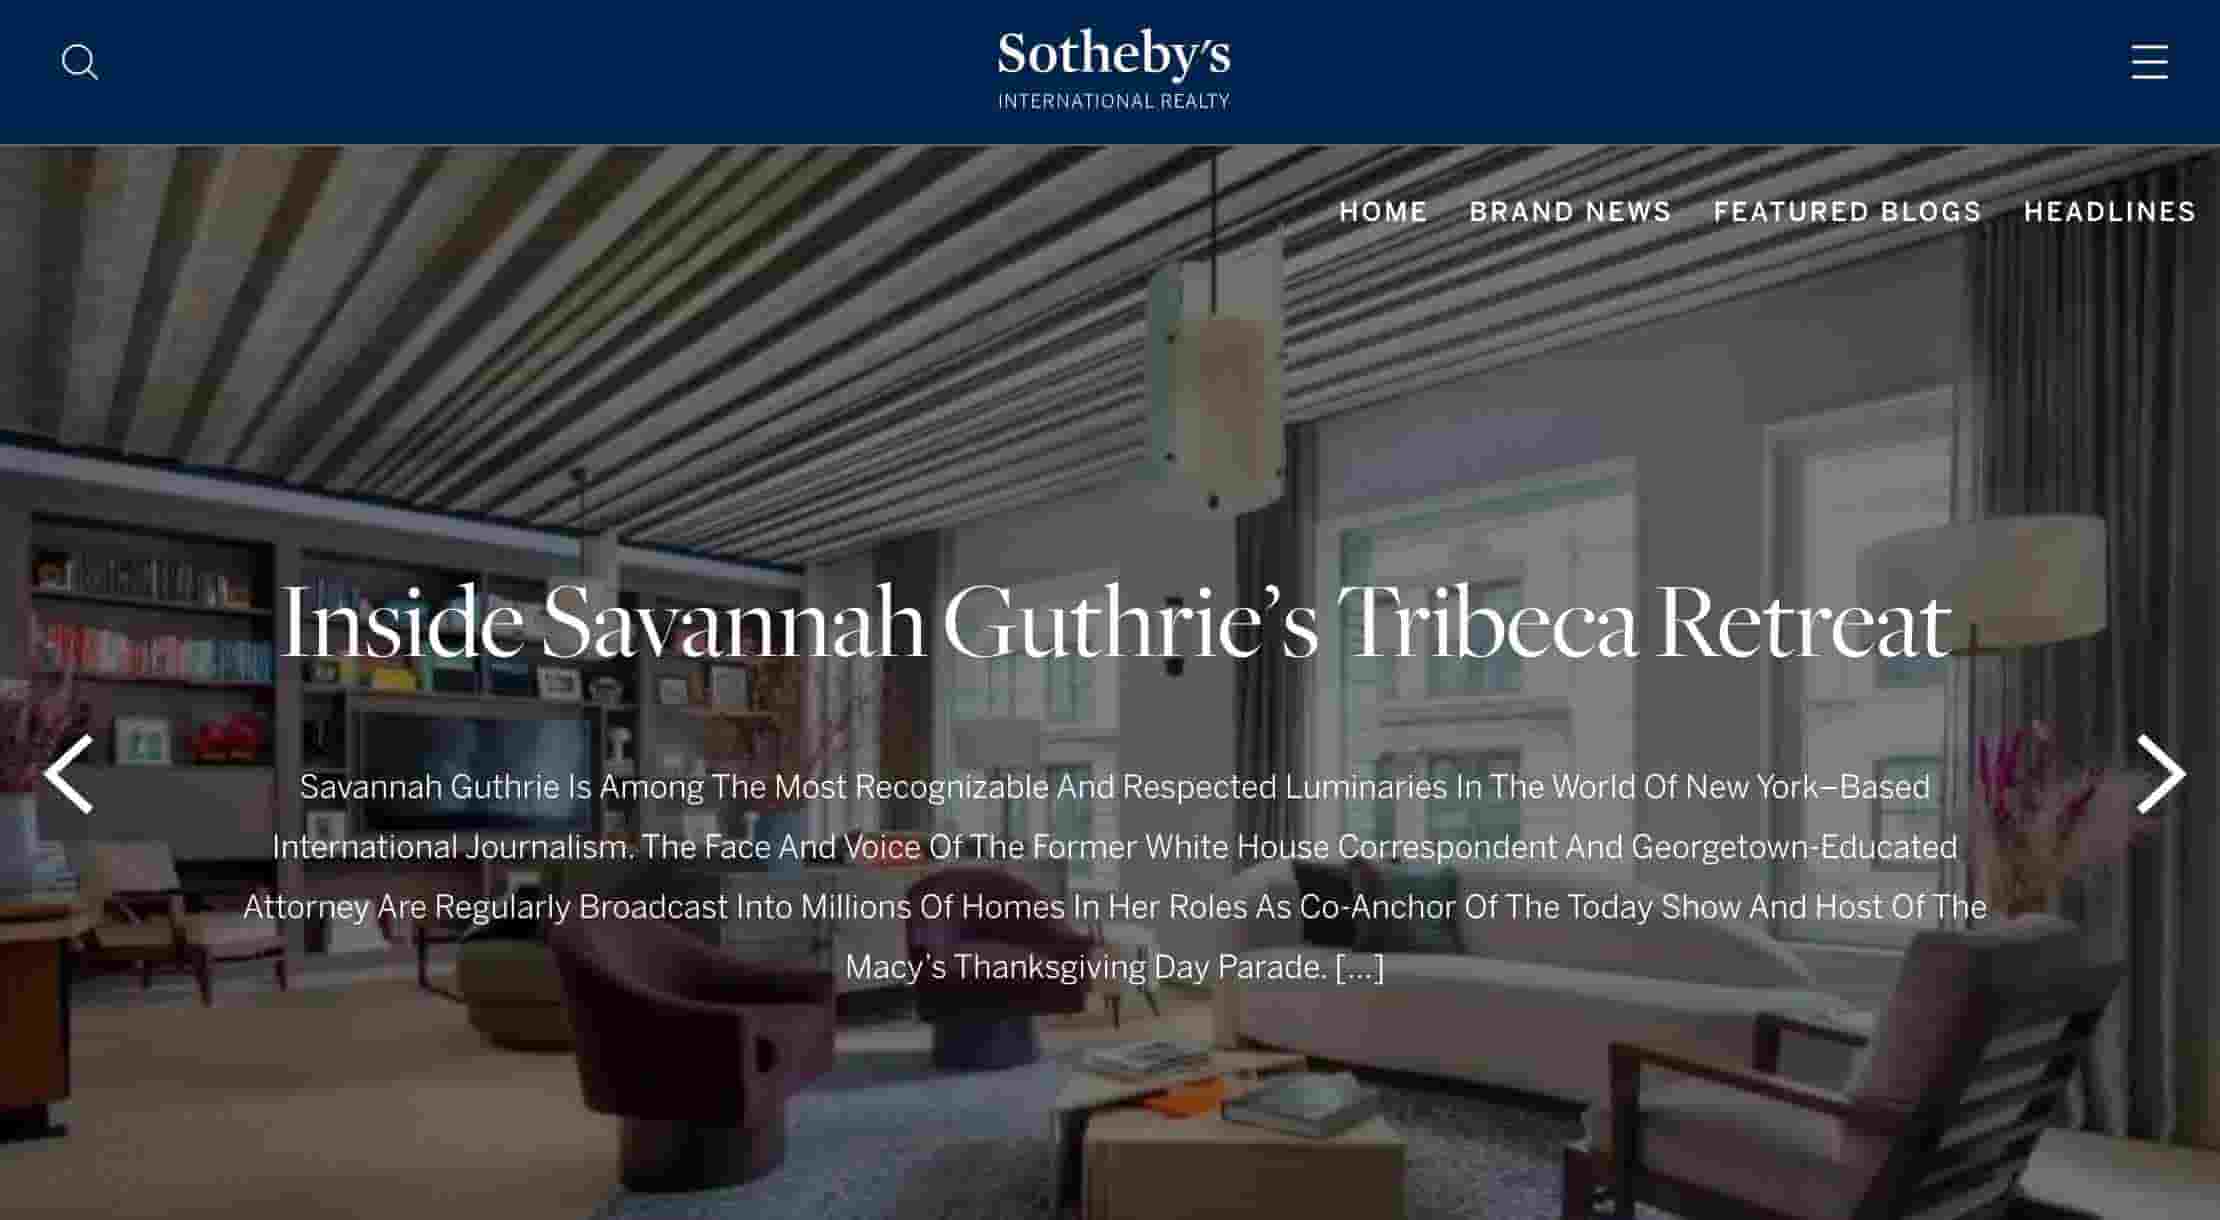 Sotheby’s realty real estate blog